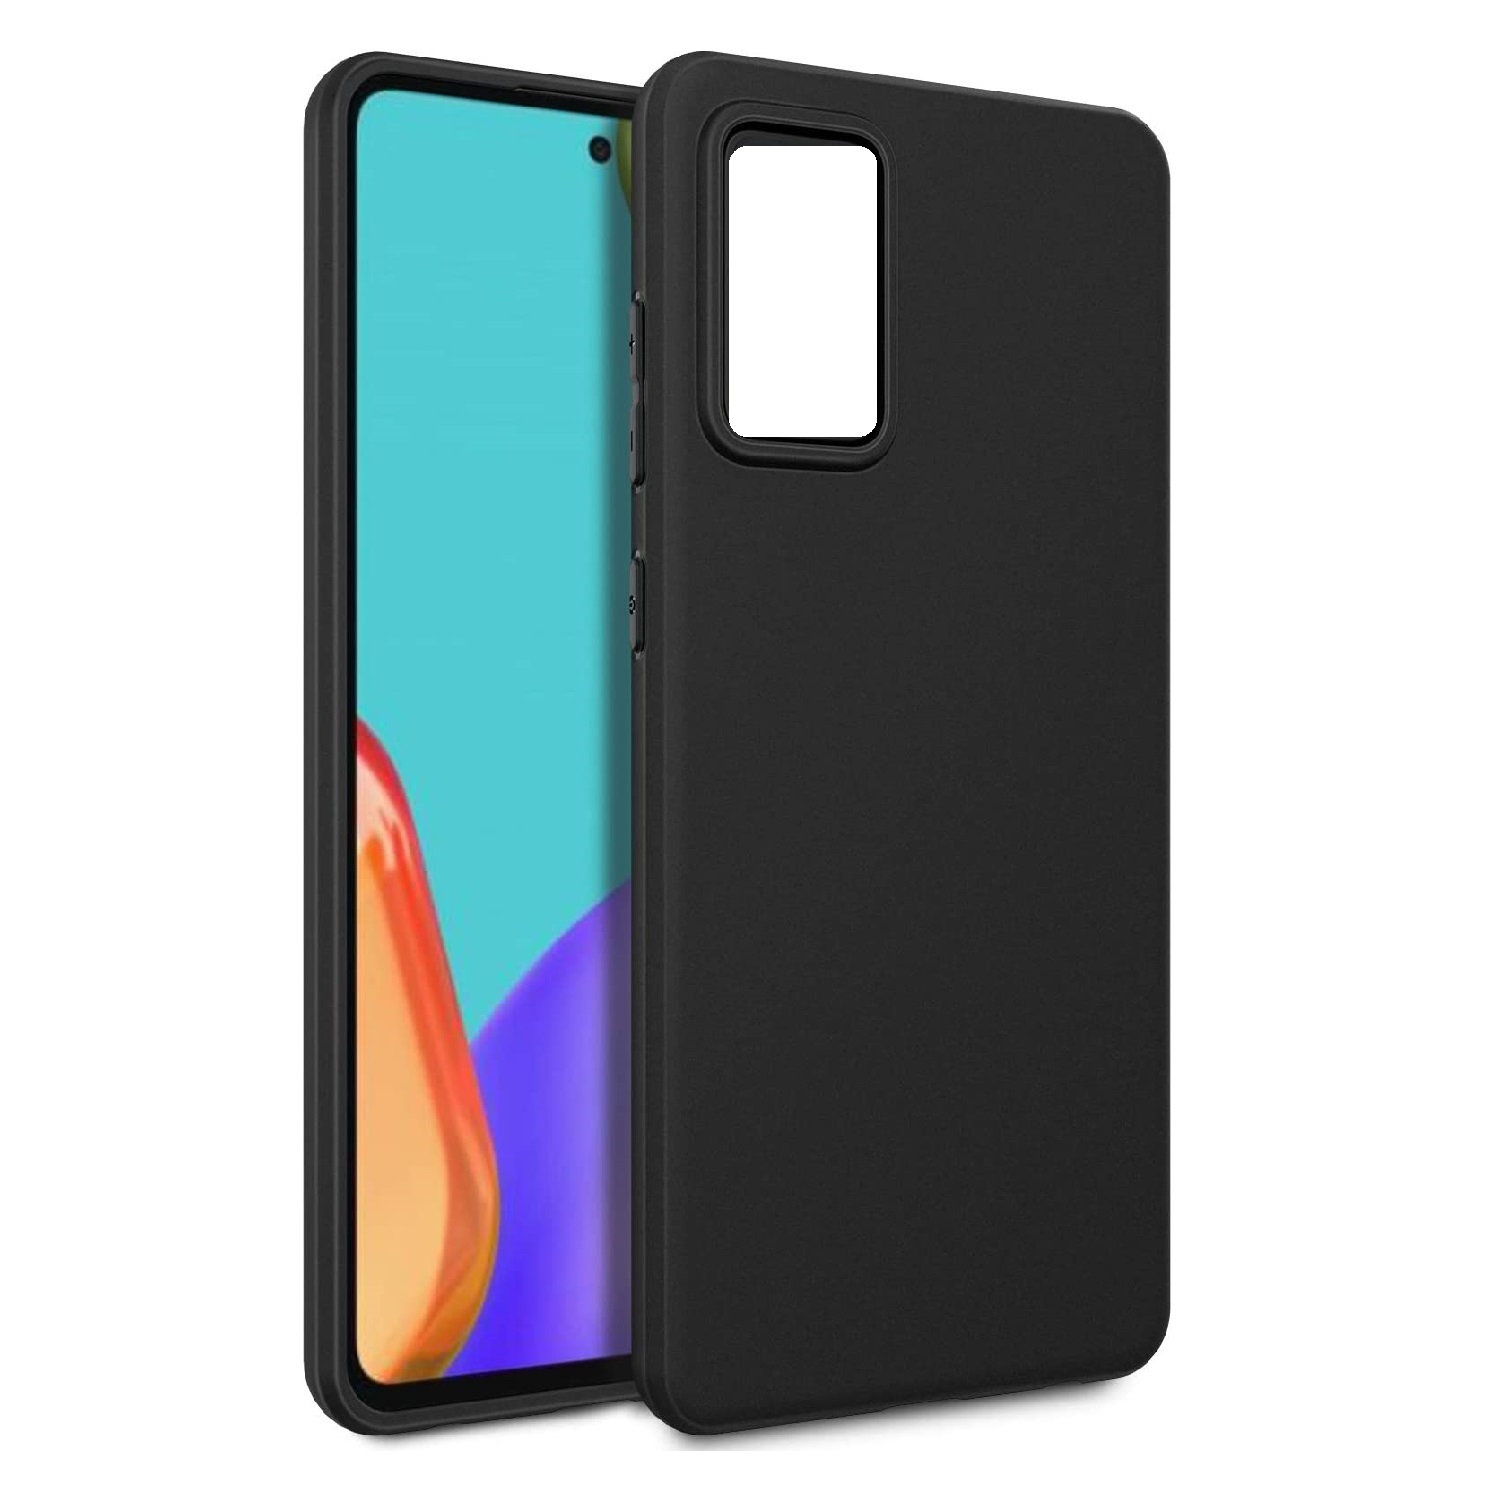 TopSave Slim, Matte Black Thin Soft Rubber Gel Back TPU Cases For Samsung Galaxy A03s 166mm Version